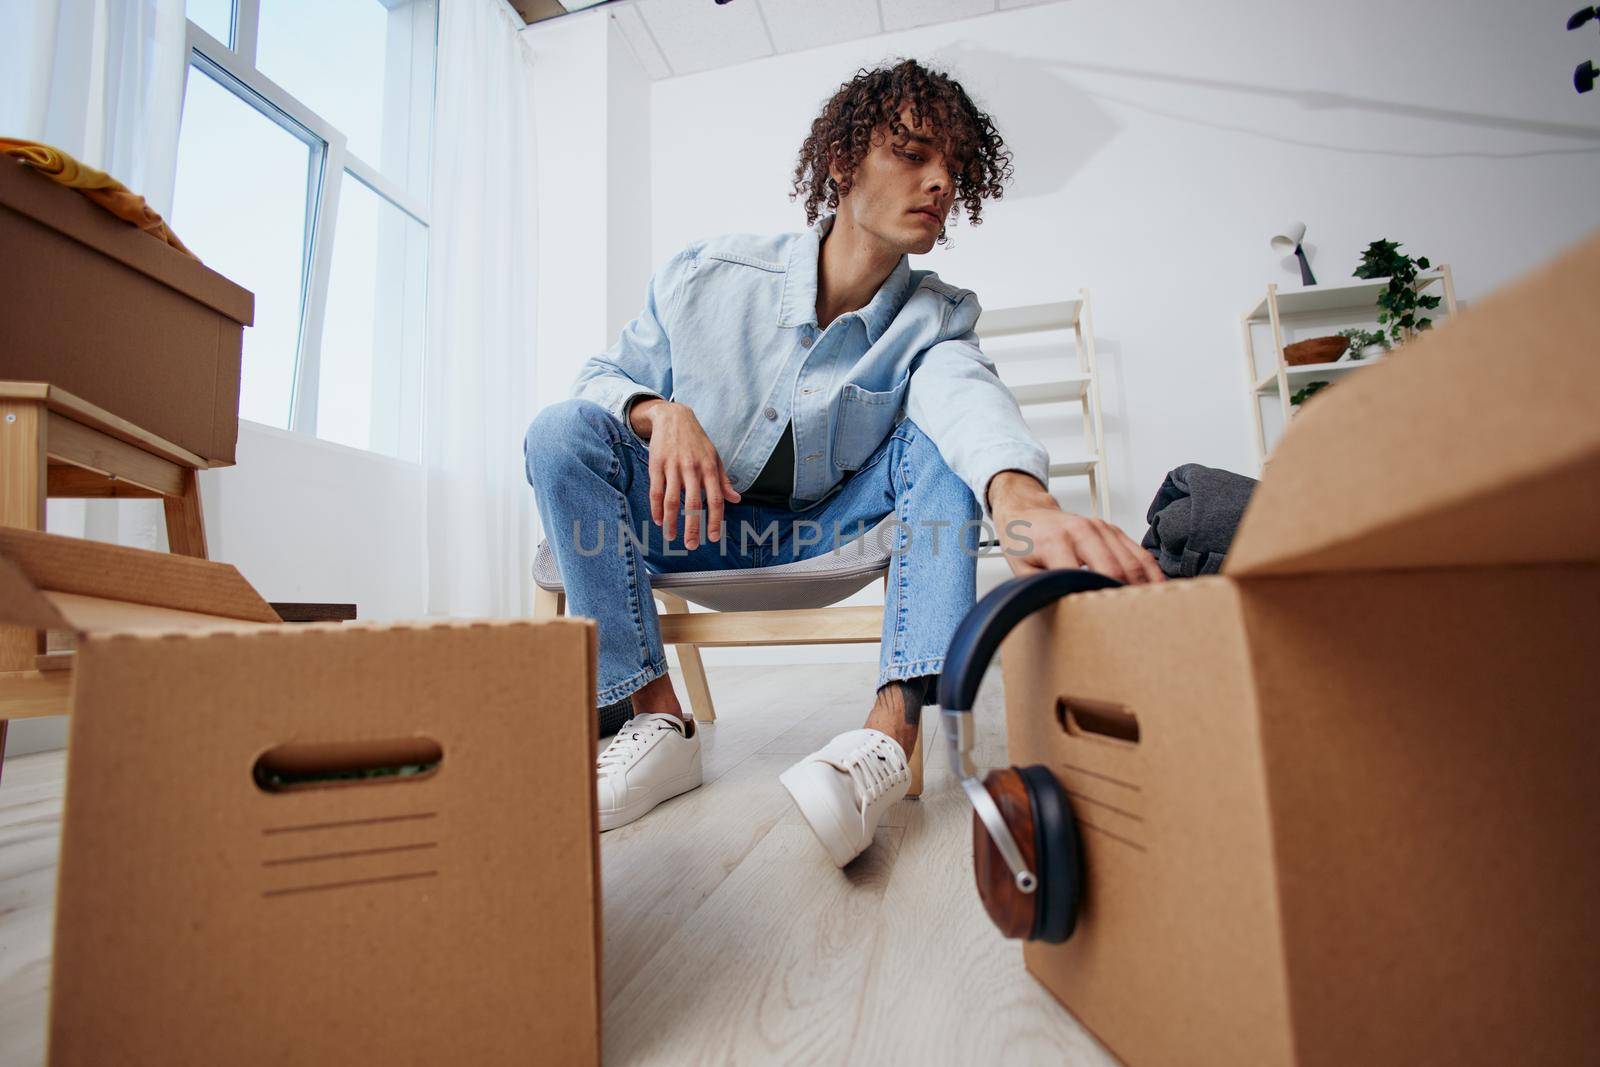 portrait of a man sitting on a chair with boxes moving Lifestyle. High quality photo